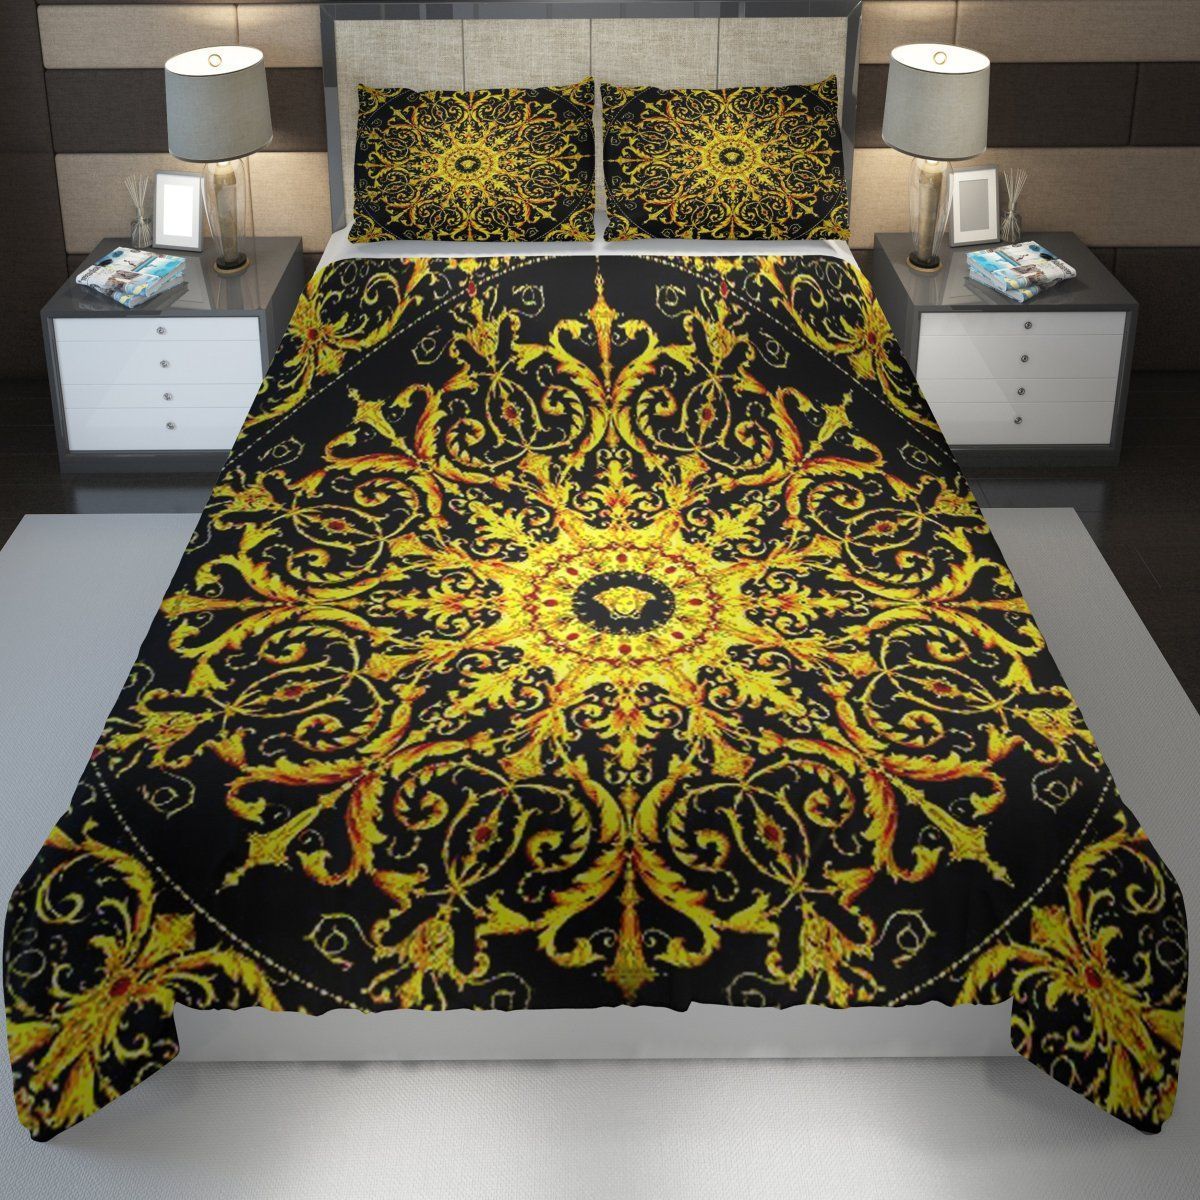 Let me show you about some luxury brand bedding set 2022 47